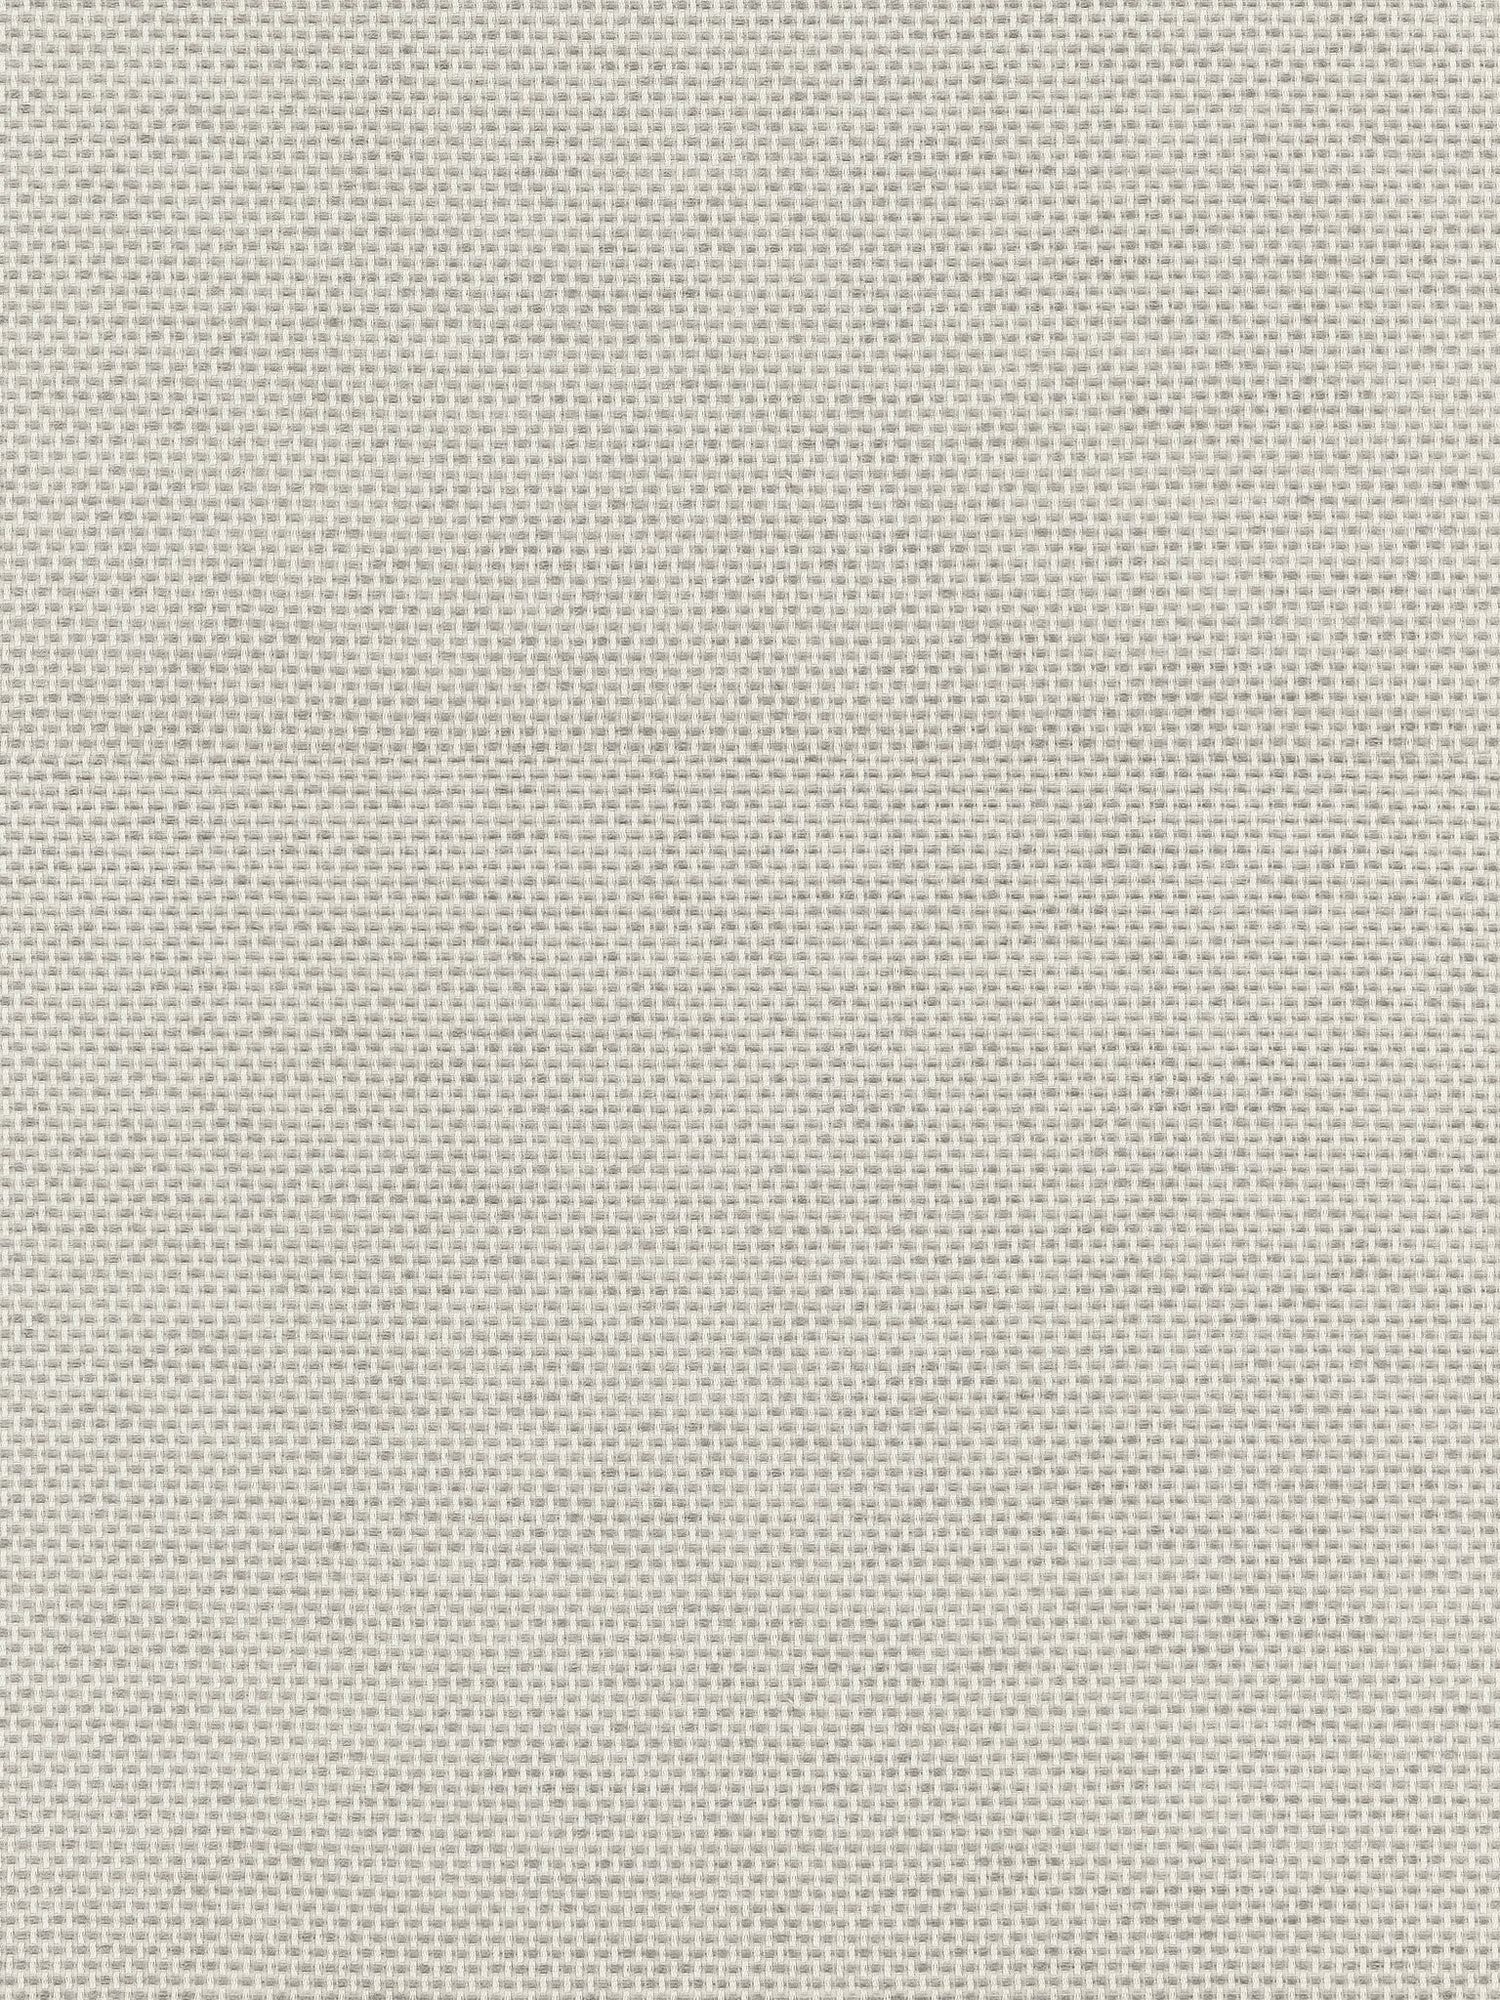 Berkshire Weave fabric in nickel color - pattern number BK 0003K65115 - by Scalamandre in the Old World Weavers collection